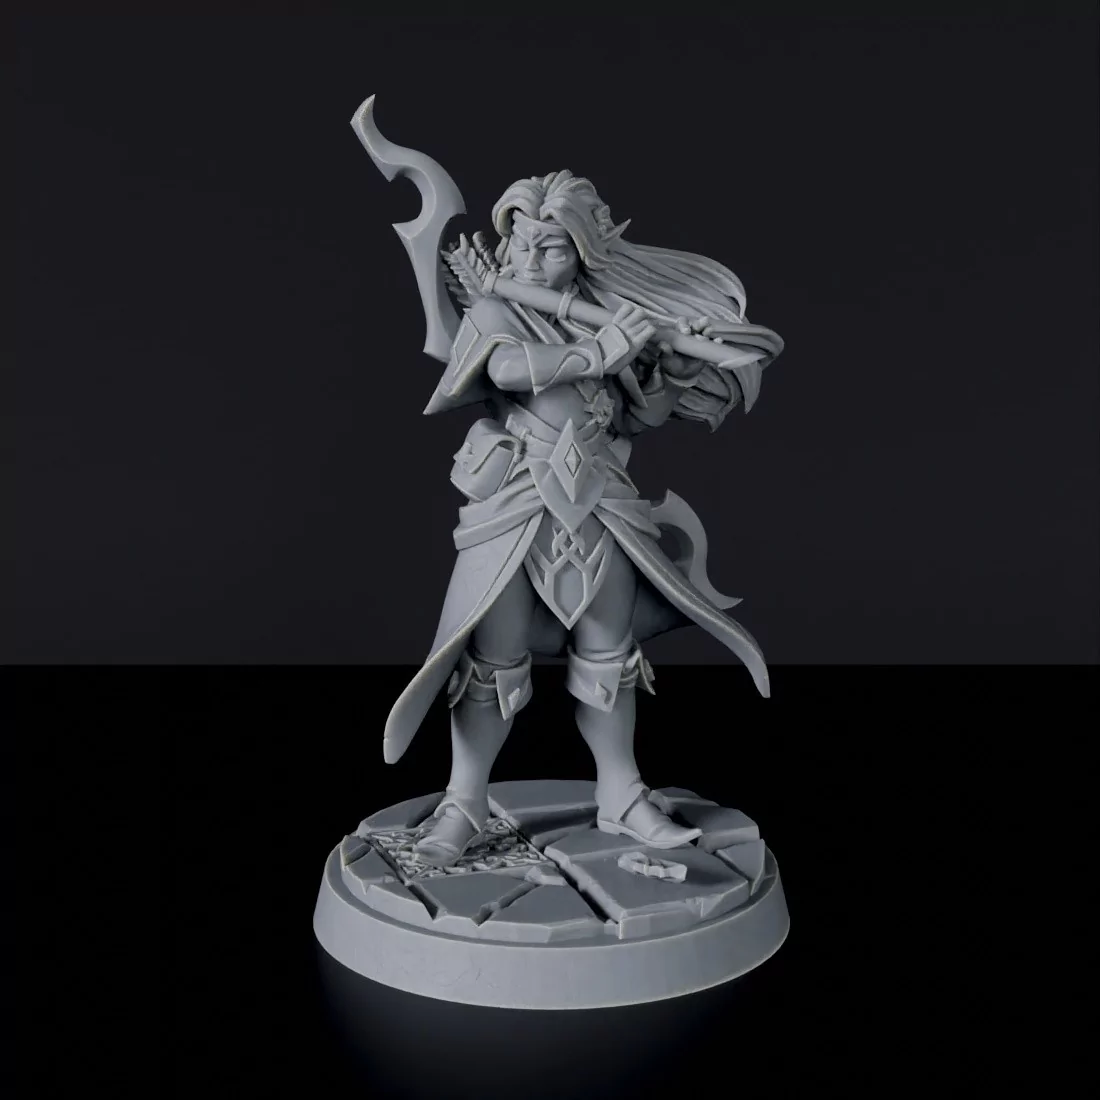 Miniature of Elf Female Bard with bow and quiver - dedicated set to army for fantasy tabletop RPG games